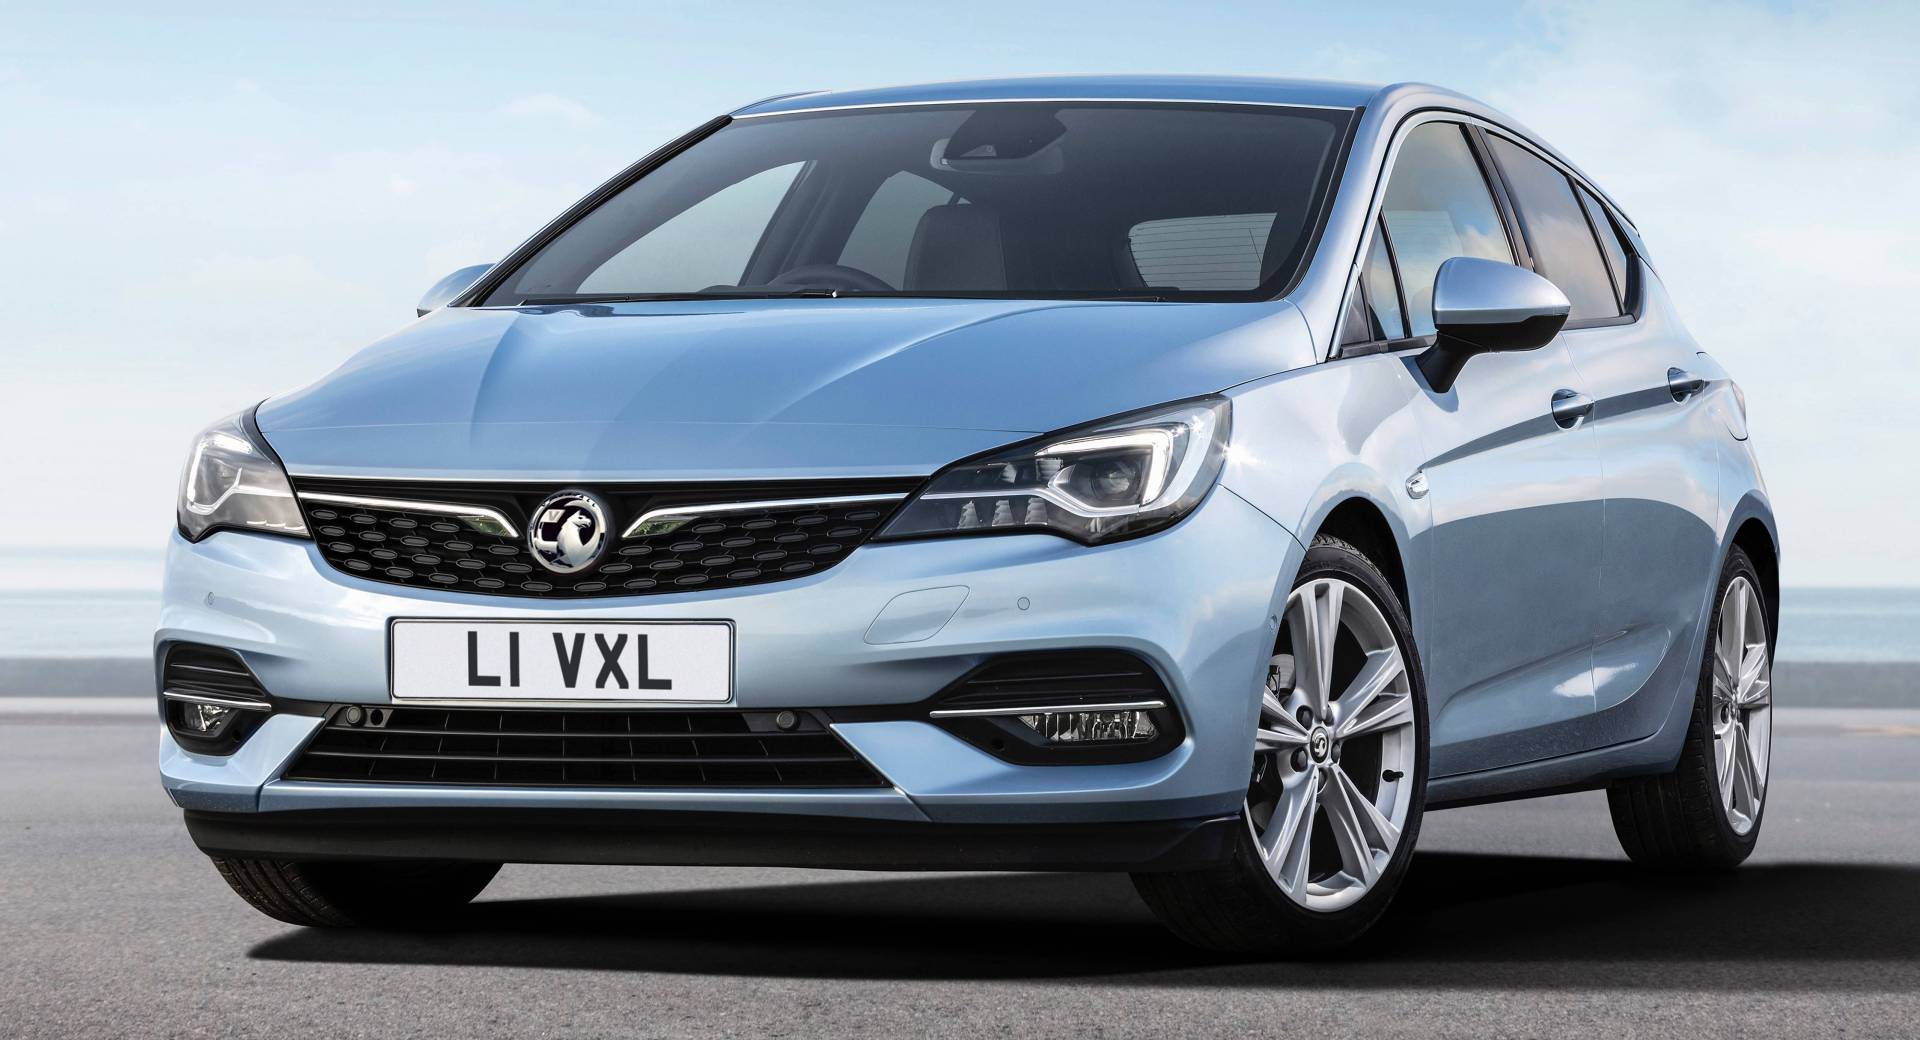 https://www.carscoops.com/wp-content/uploads/2019/07/ddb16795-2020-vauxhall-astra-0.jpg